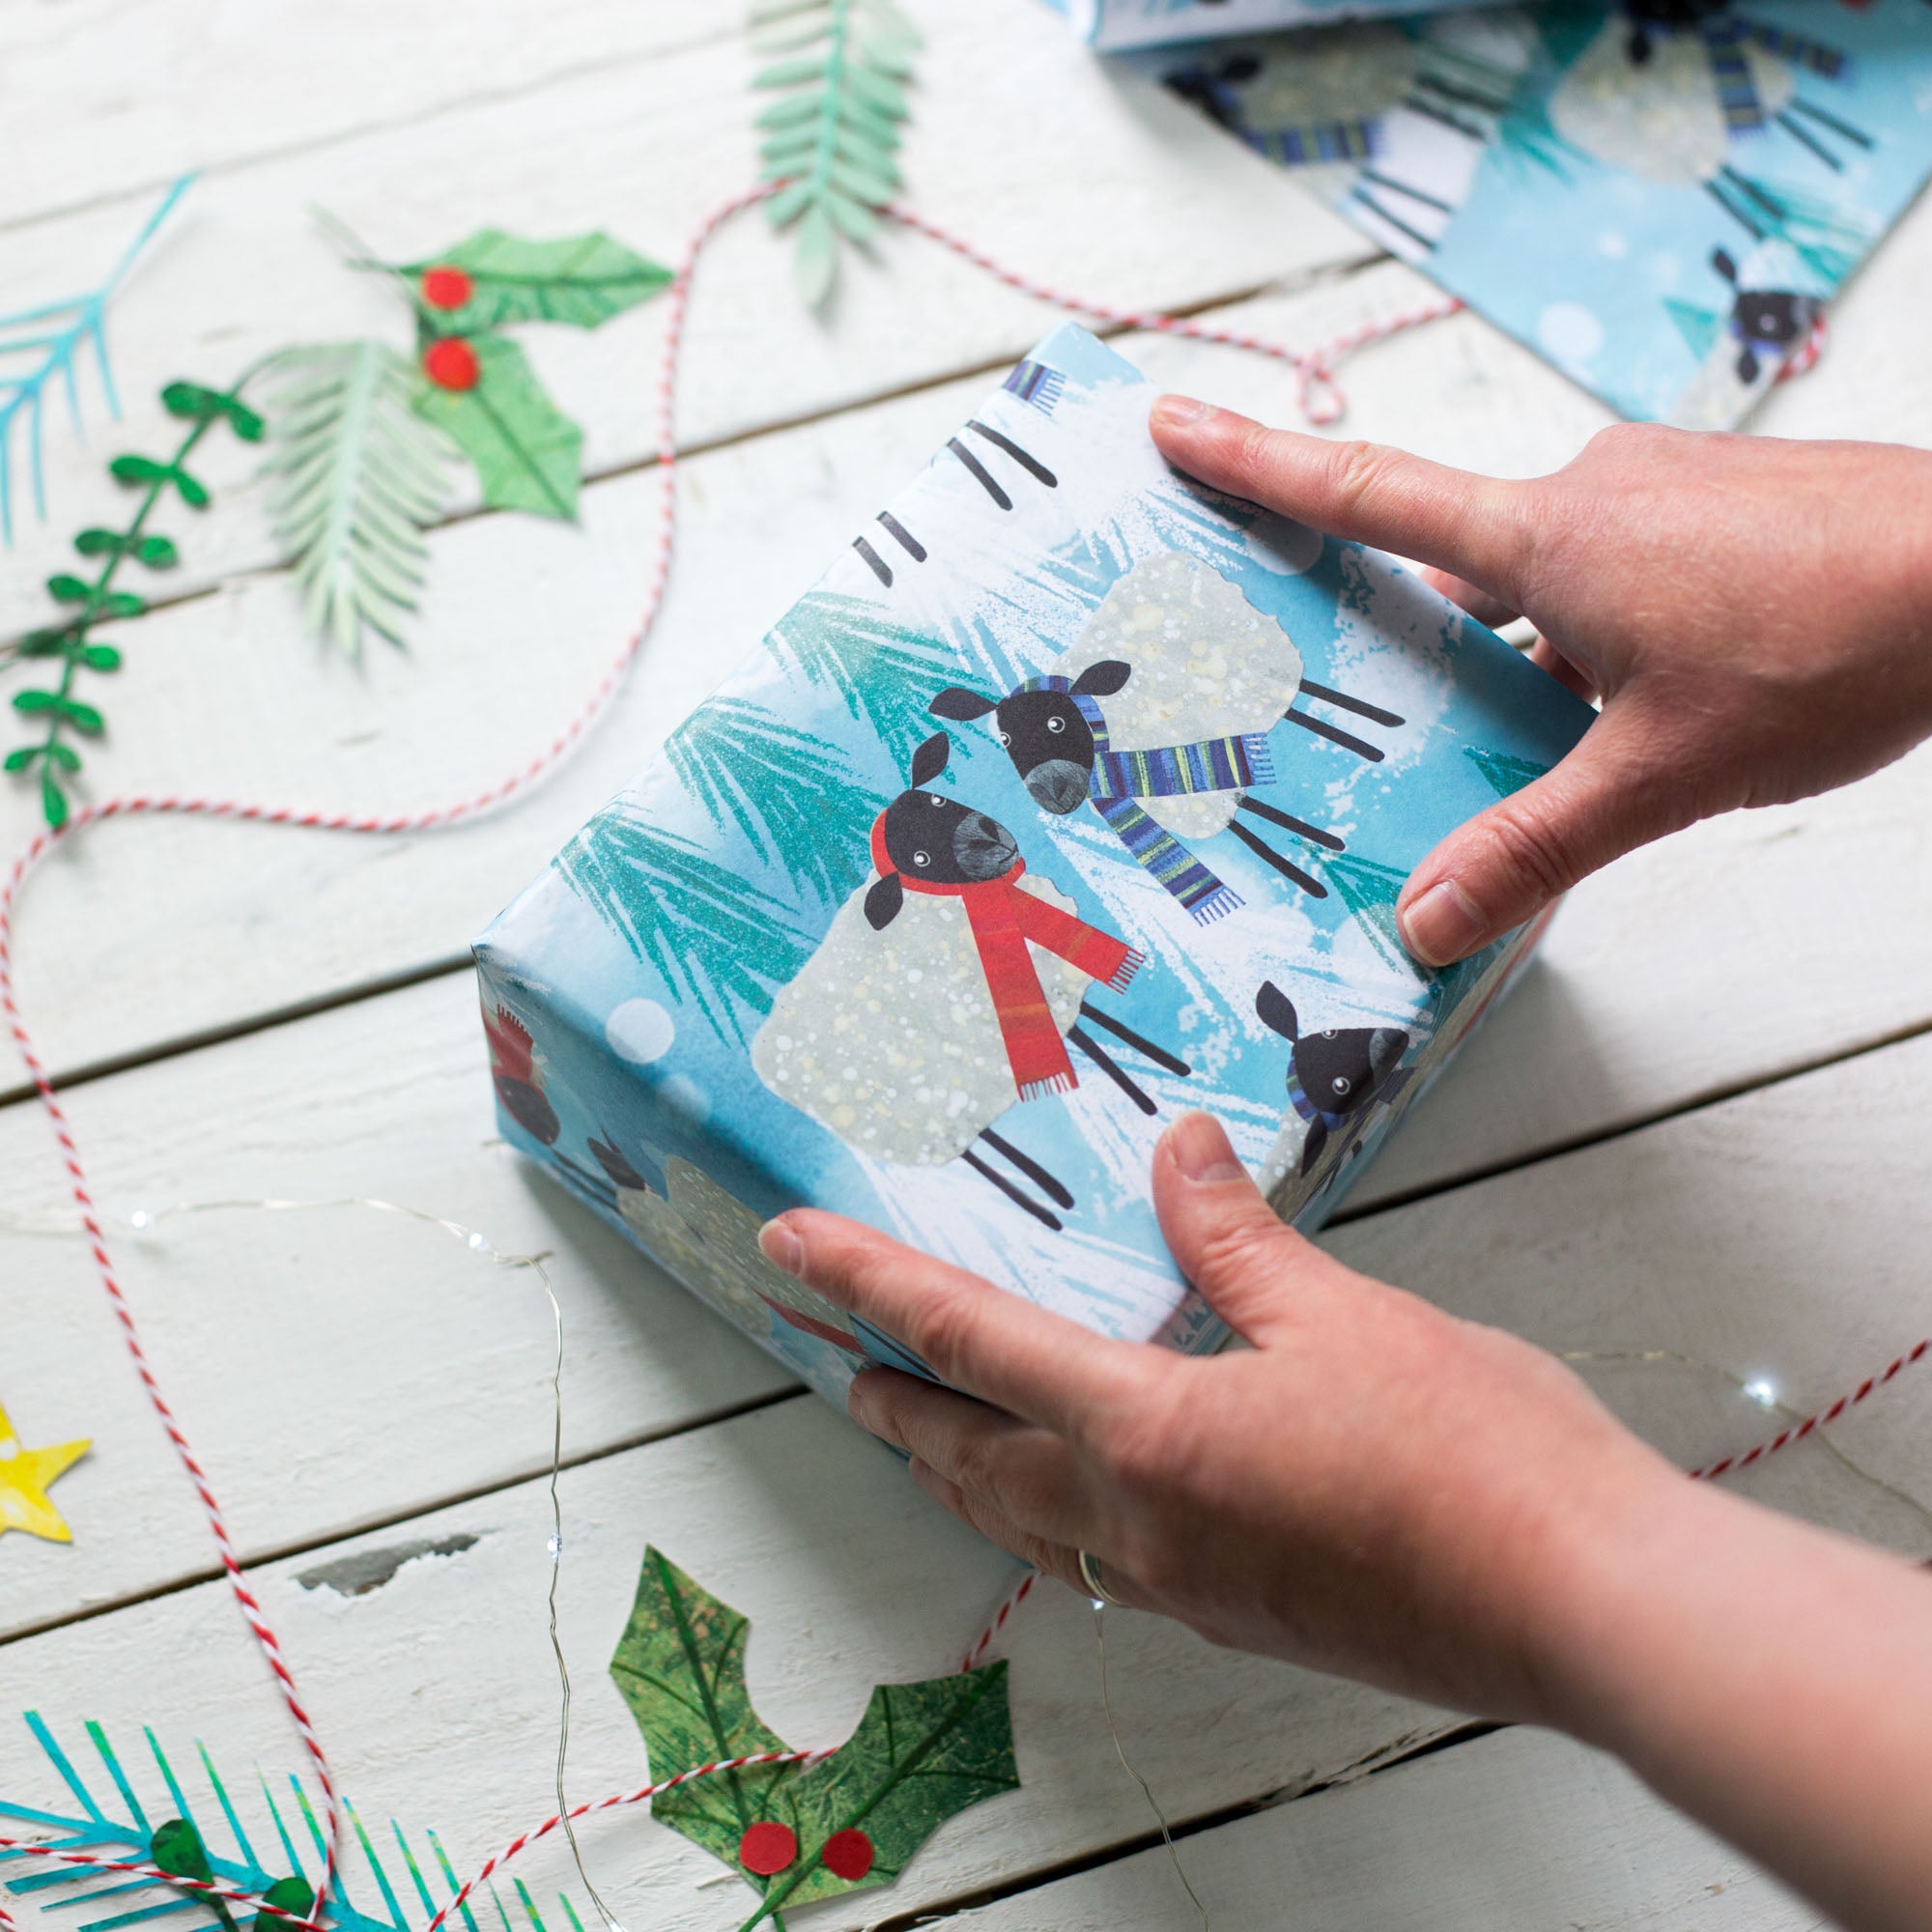 In this image two hands are placed on top of a cuboid parcel wrapped in the winter woolies gift wrap. The gift wrap section visible shows two black-headed sheep facing each other. One wears a red scarf while the other wears a purple toned striped scarf. The background is blue with Christmas trees and snow dispersed between the cheery characters.